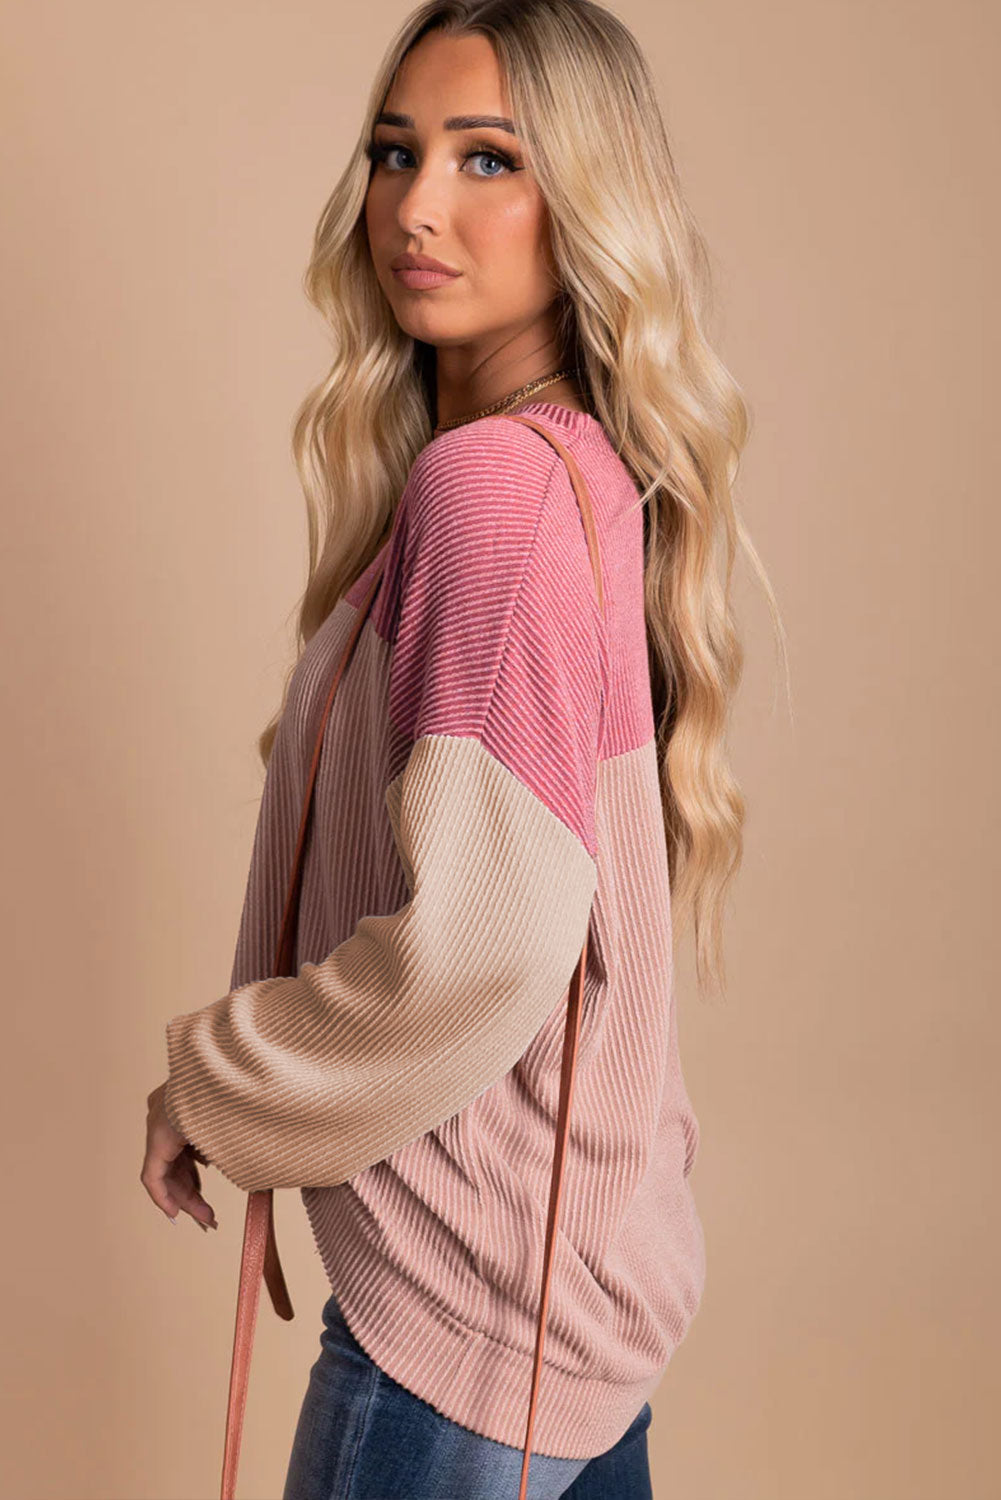 Cali Chic Women's Top Pink Color Block Celebrity Long Sleeve Ribbed Loose